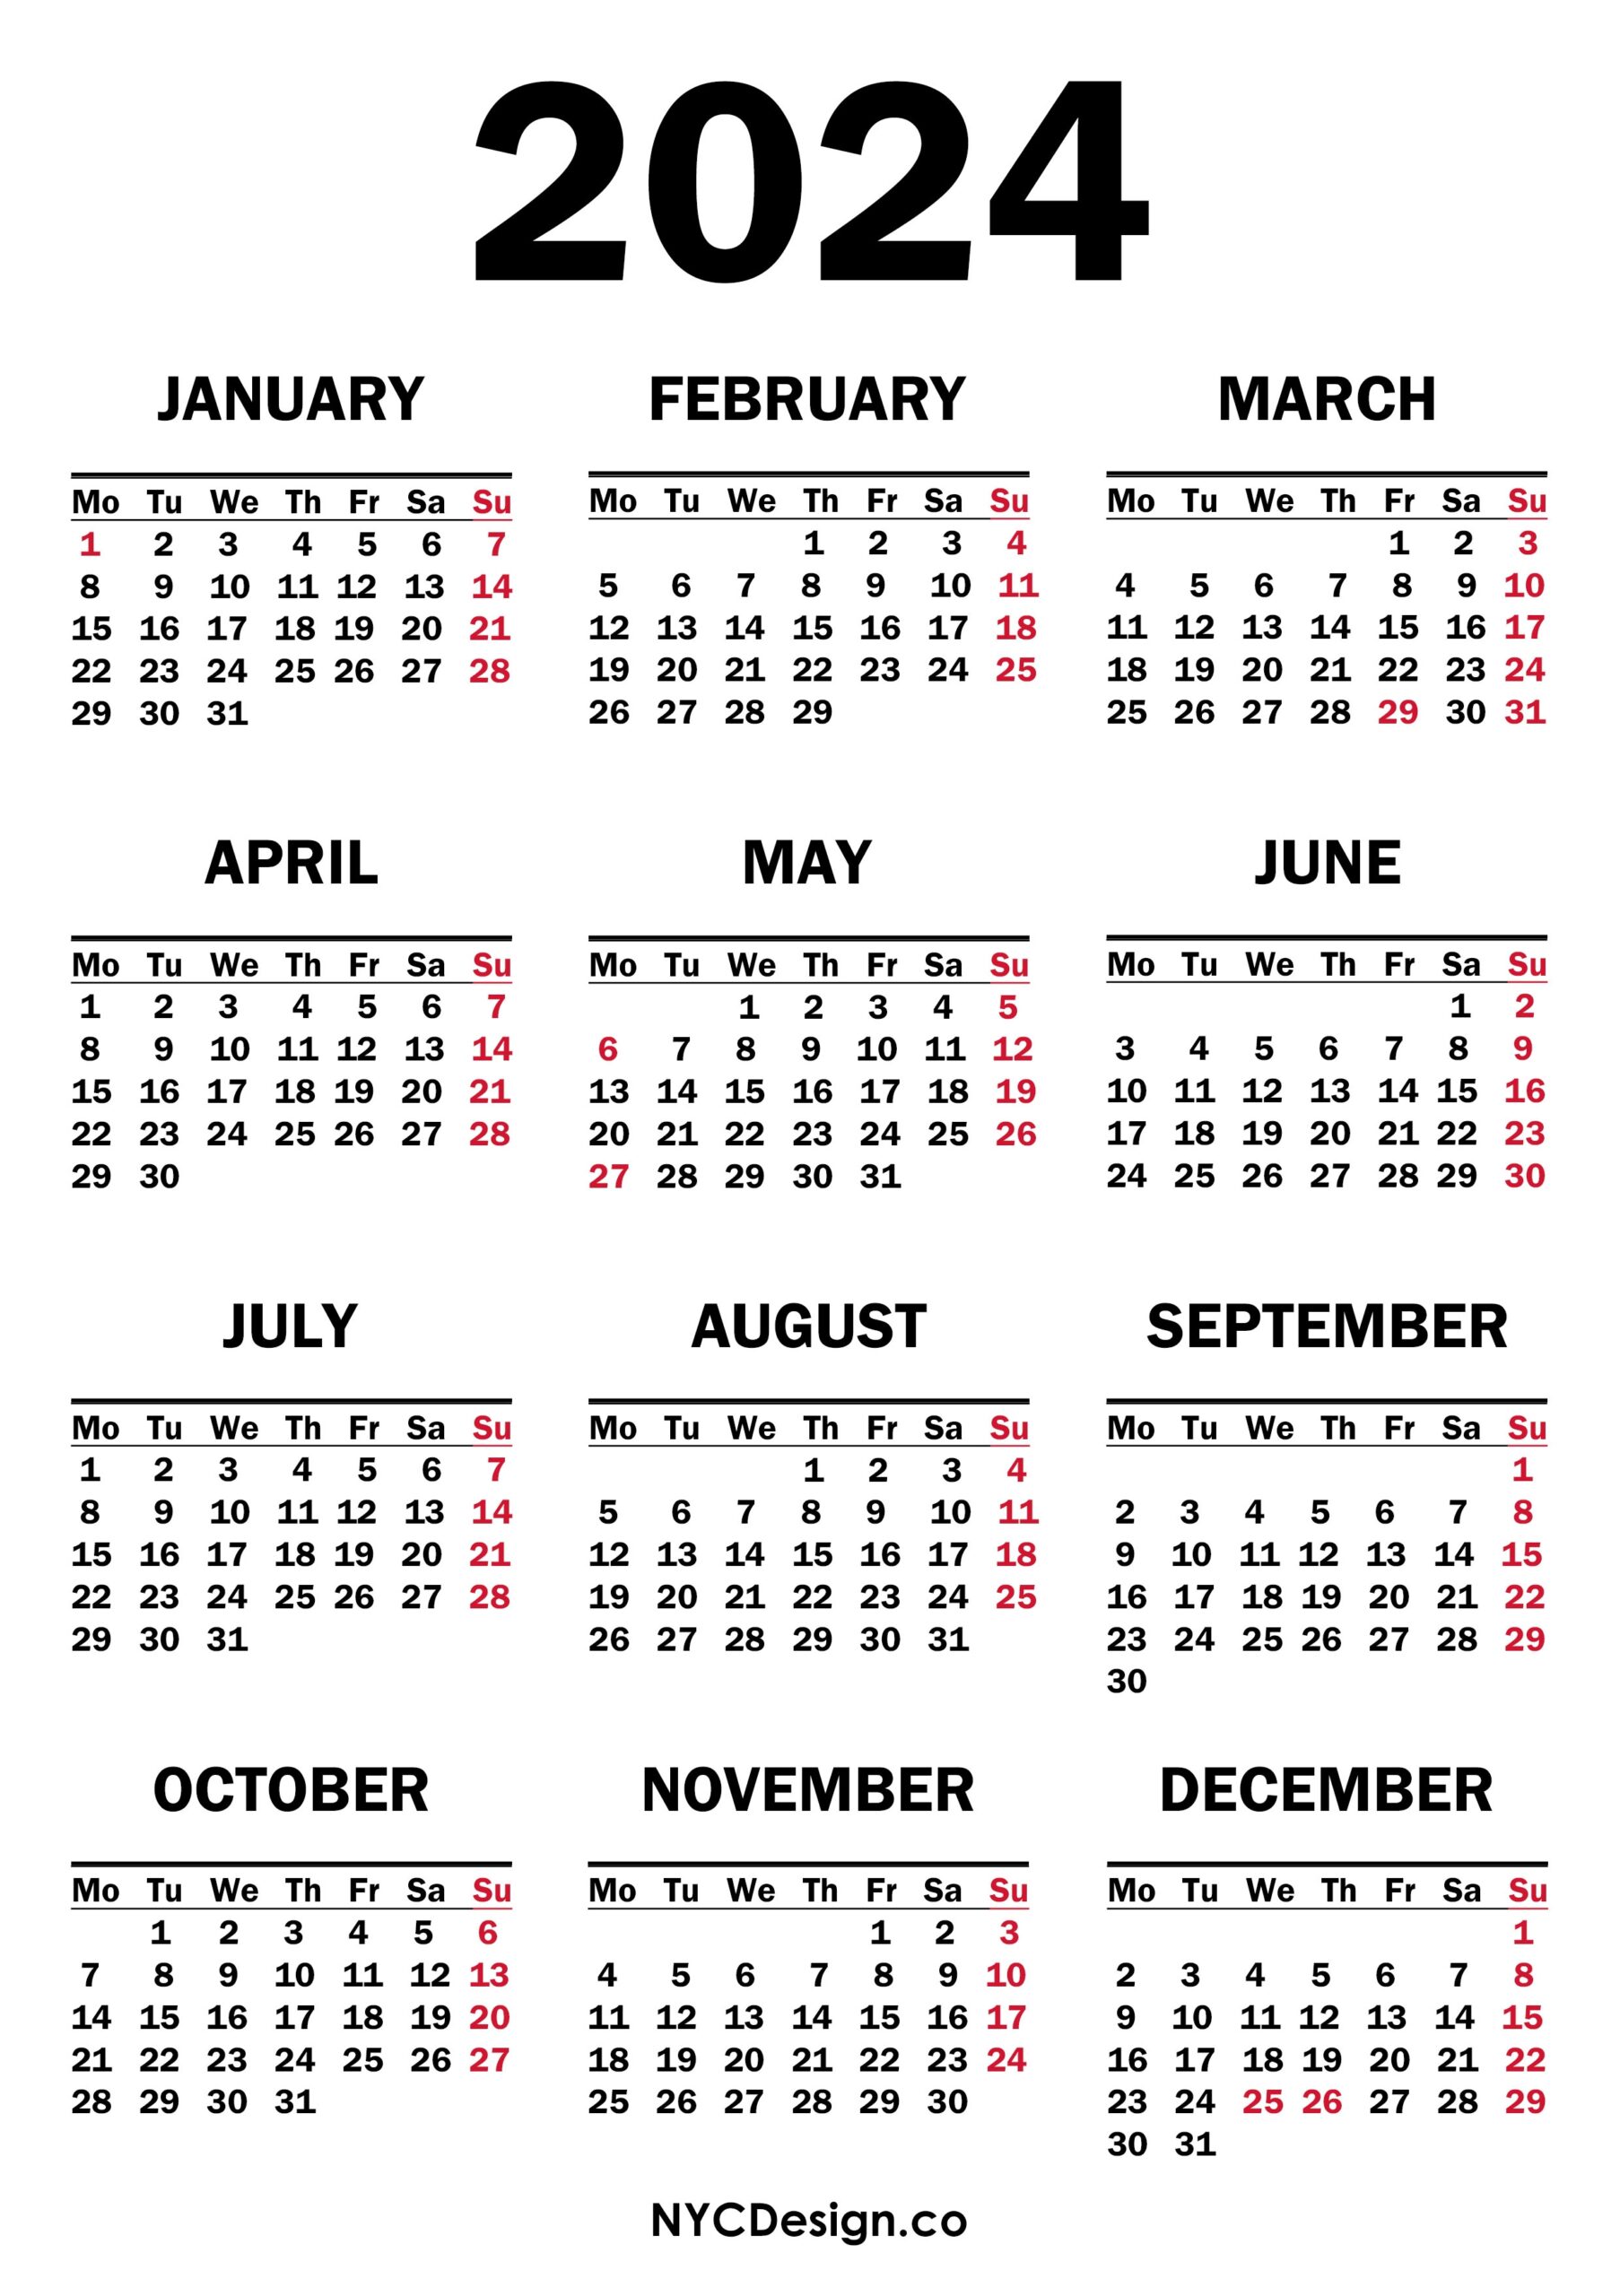 2024 Calendar With Holidays Printable Customize And Print - Free Printable 2024 Calendar With Holidays Month By Month